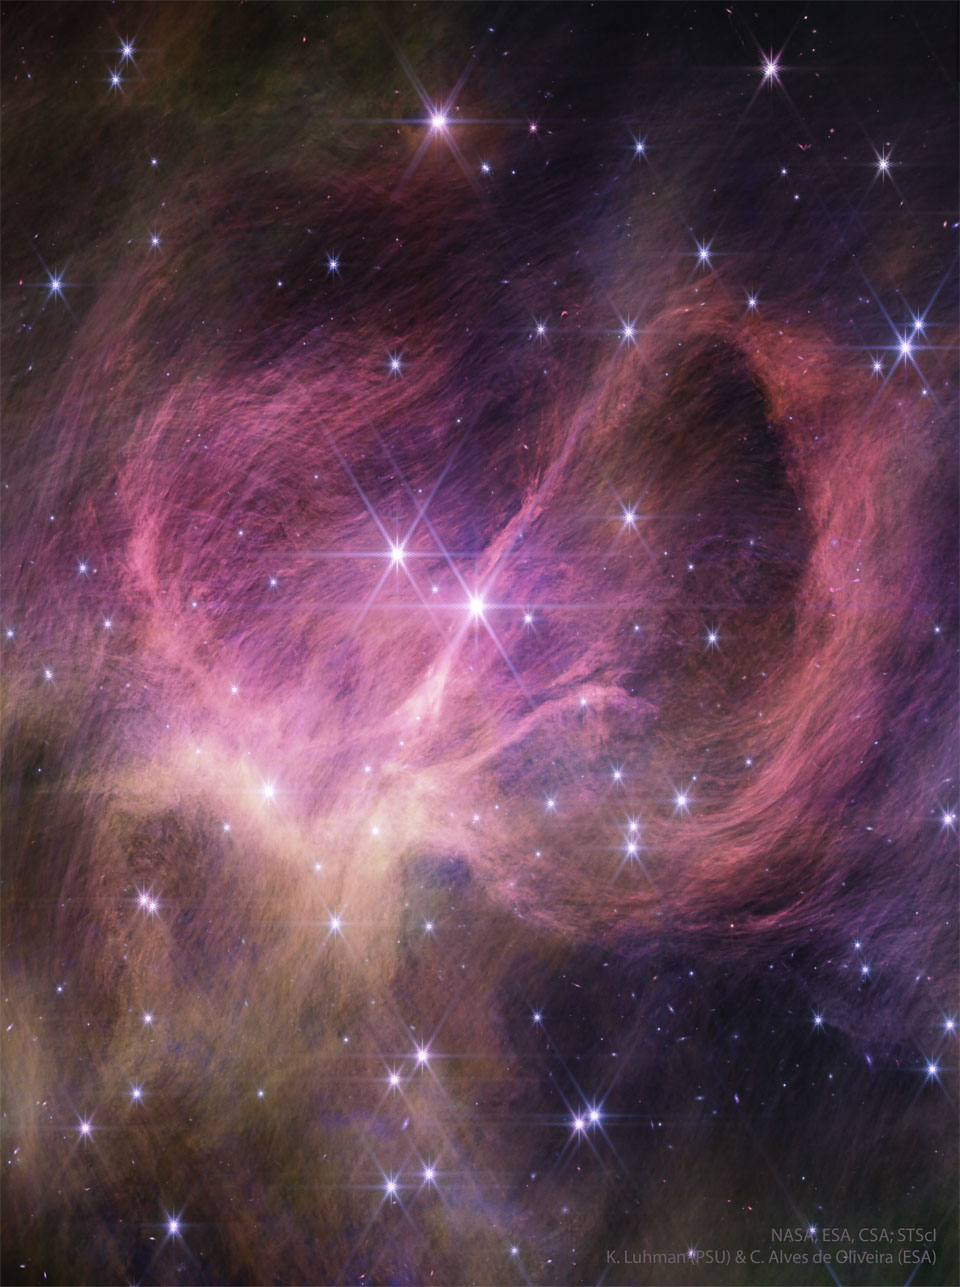 A cluster of stars is shown along with surrounding nebular gas a
and dust. Shown in infrared light in pink, the dust winds around the 
nebula center and itself appears composed of many finer filaments.
Please see the explanation for more detailed information.